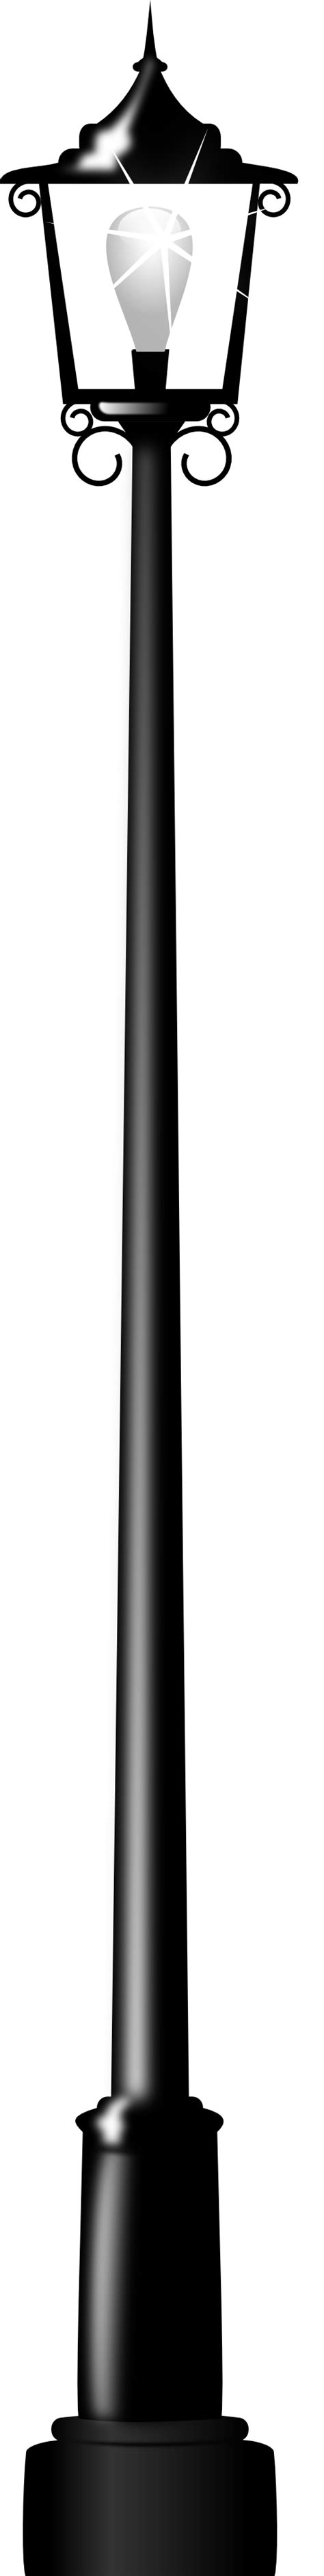 Light Poles Clipart Clipground